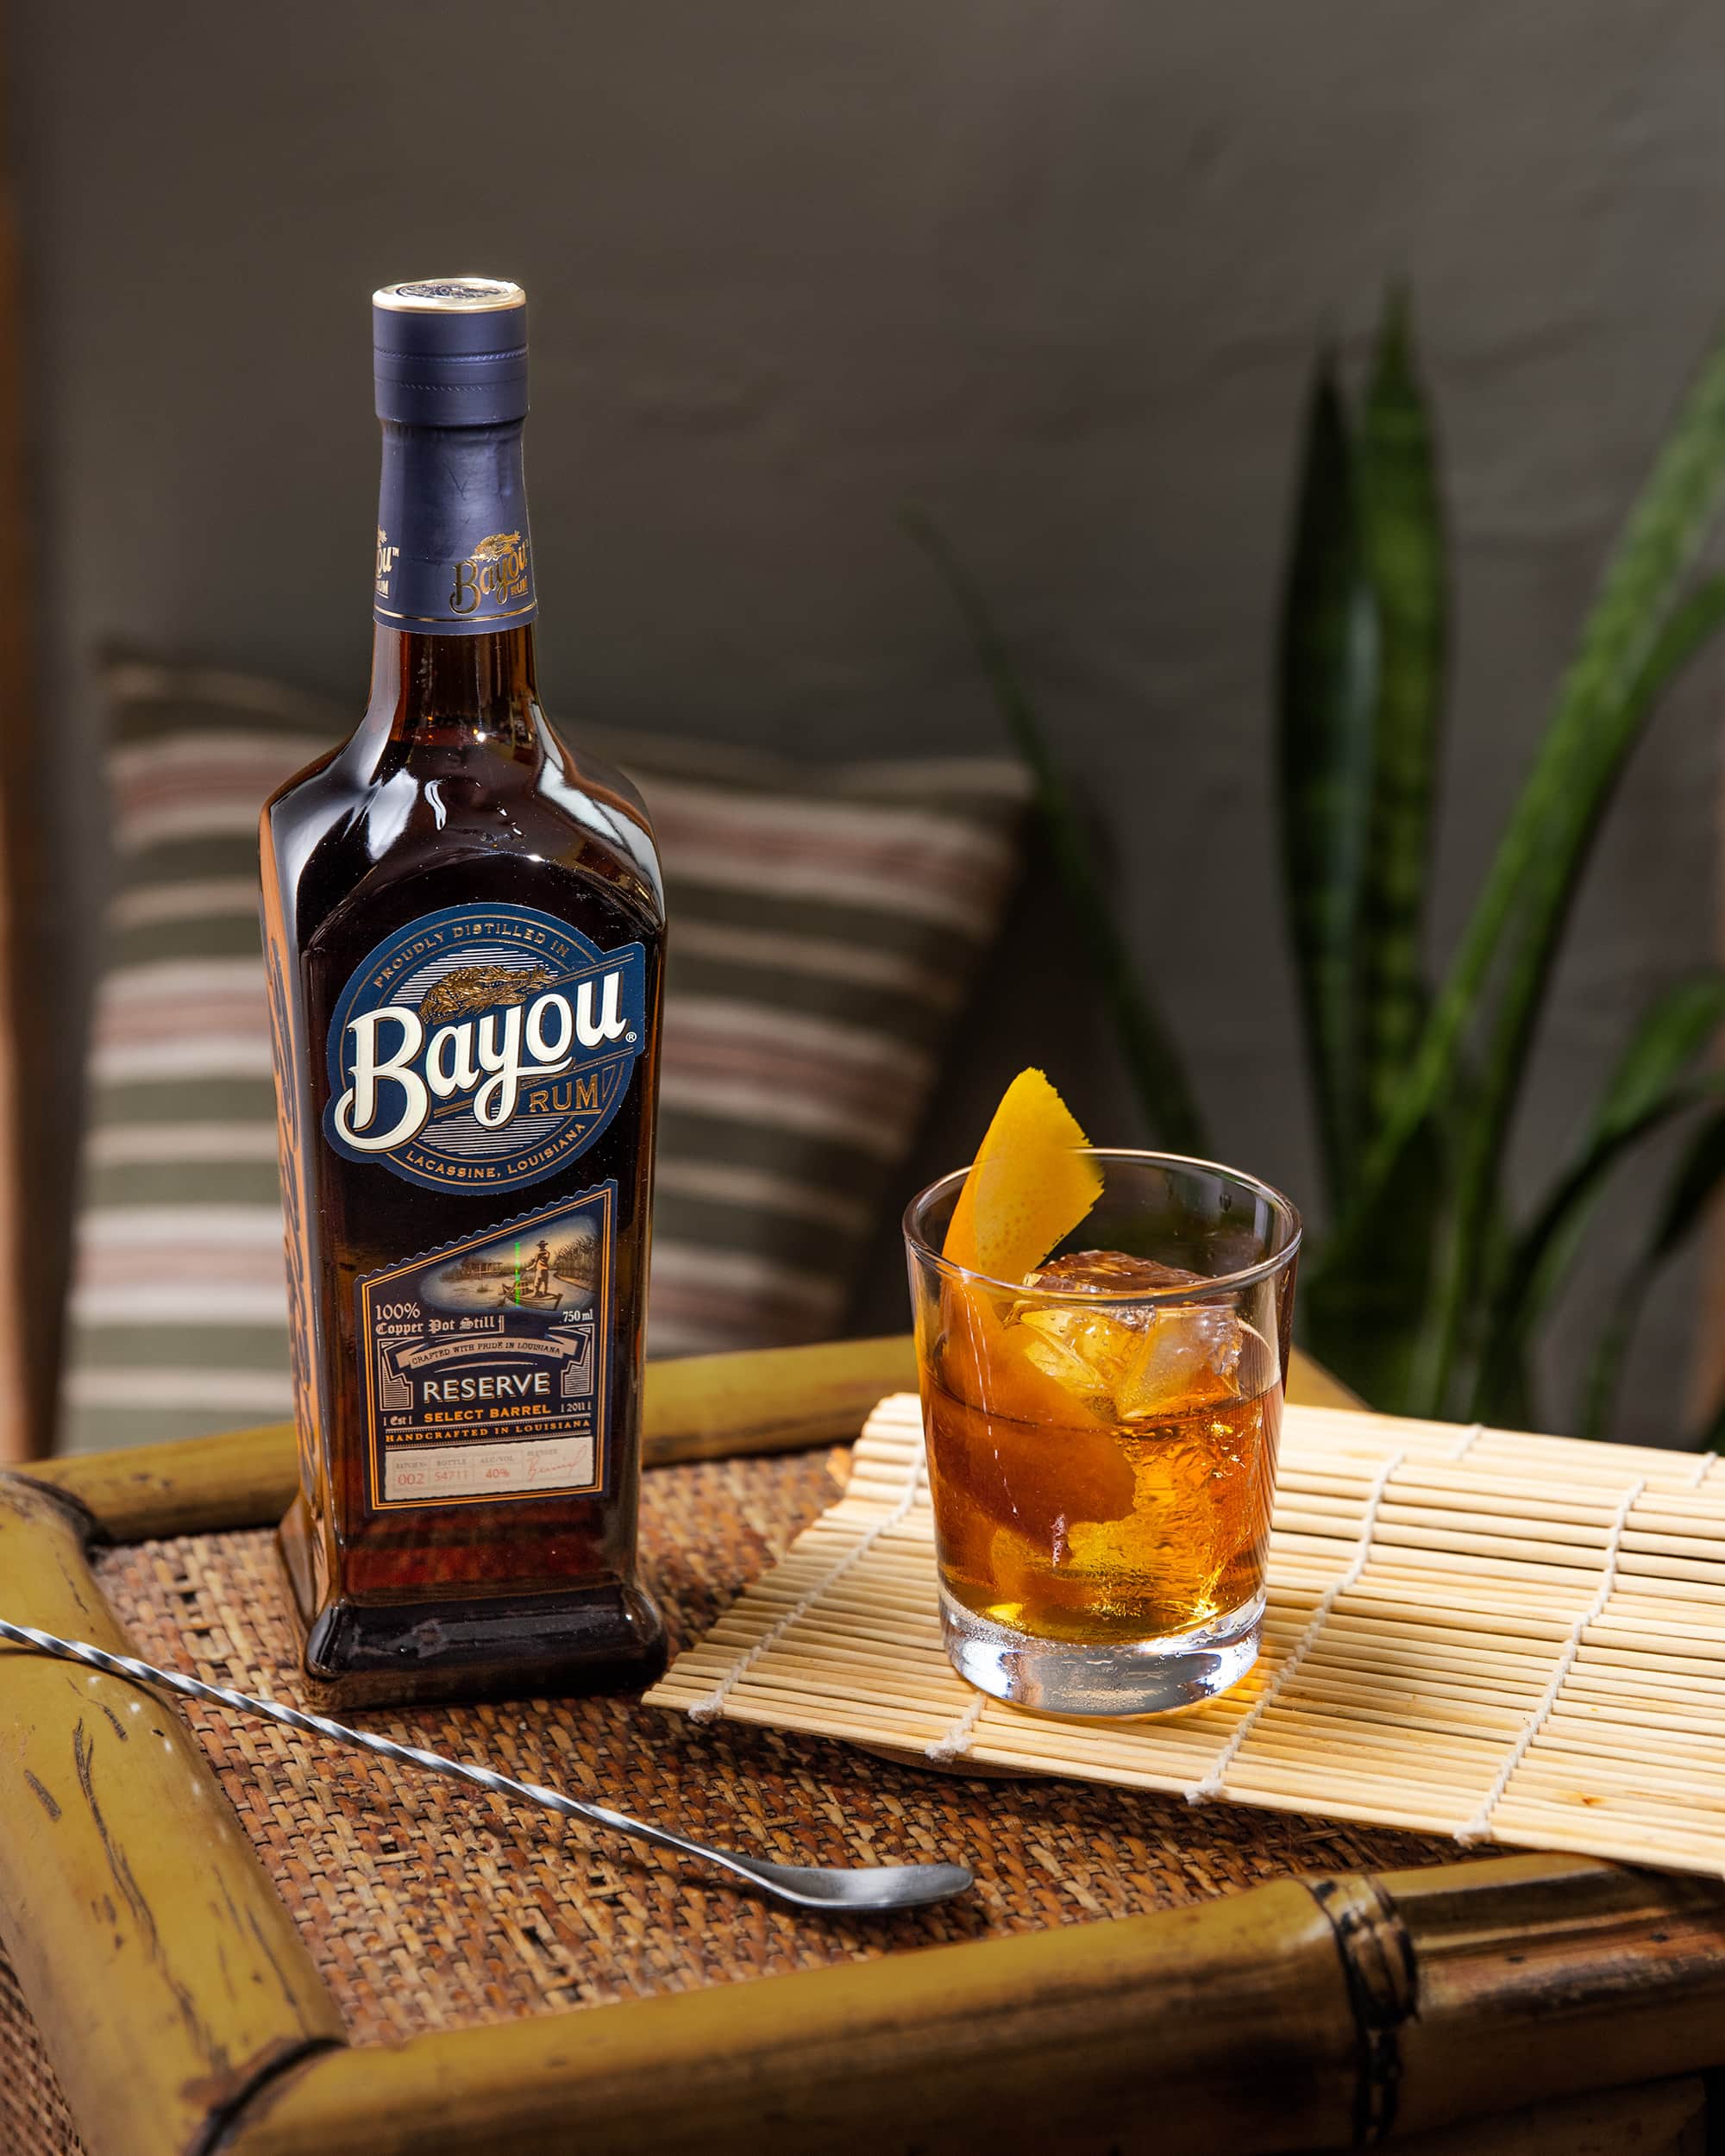 Bayou Reserve Rum and old fashioned